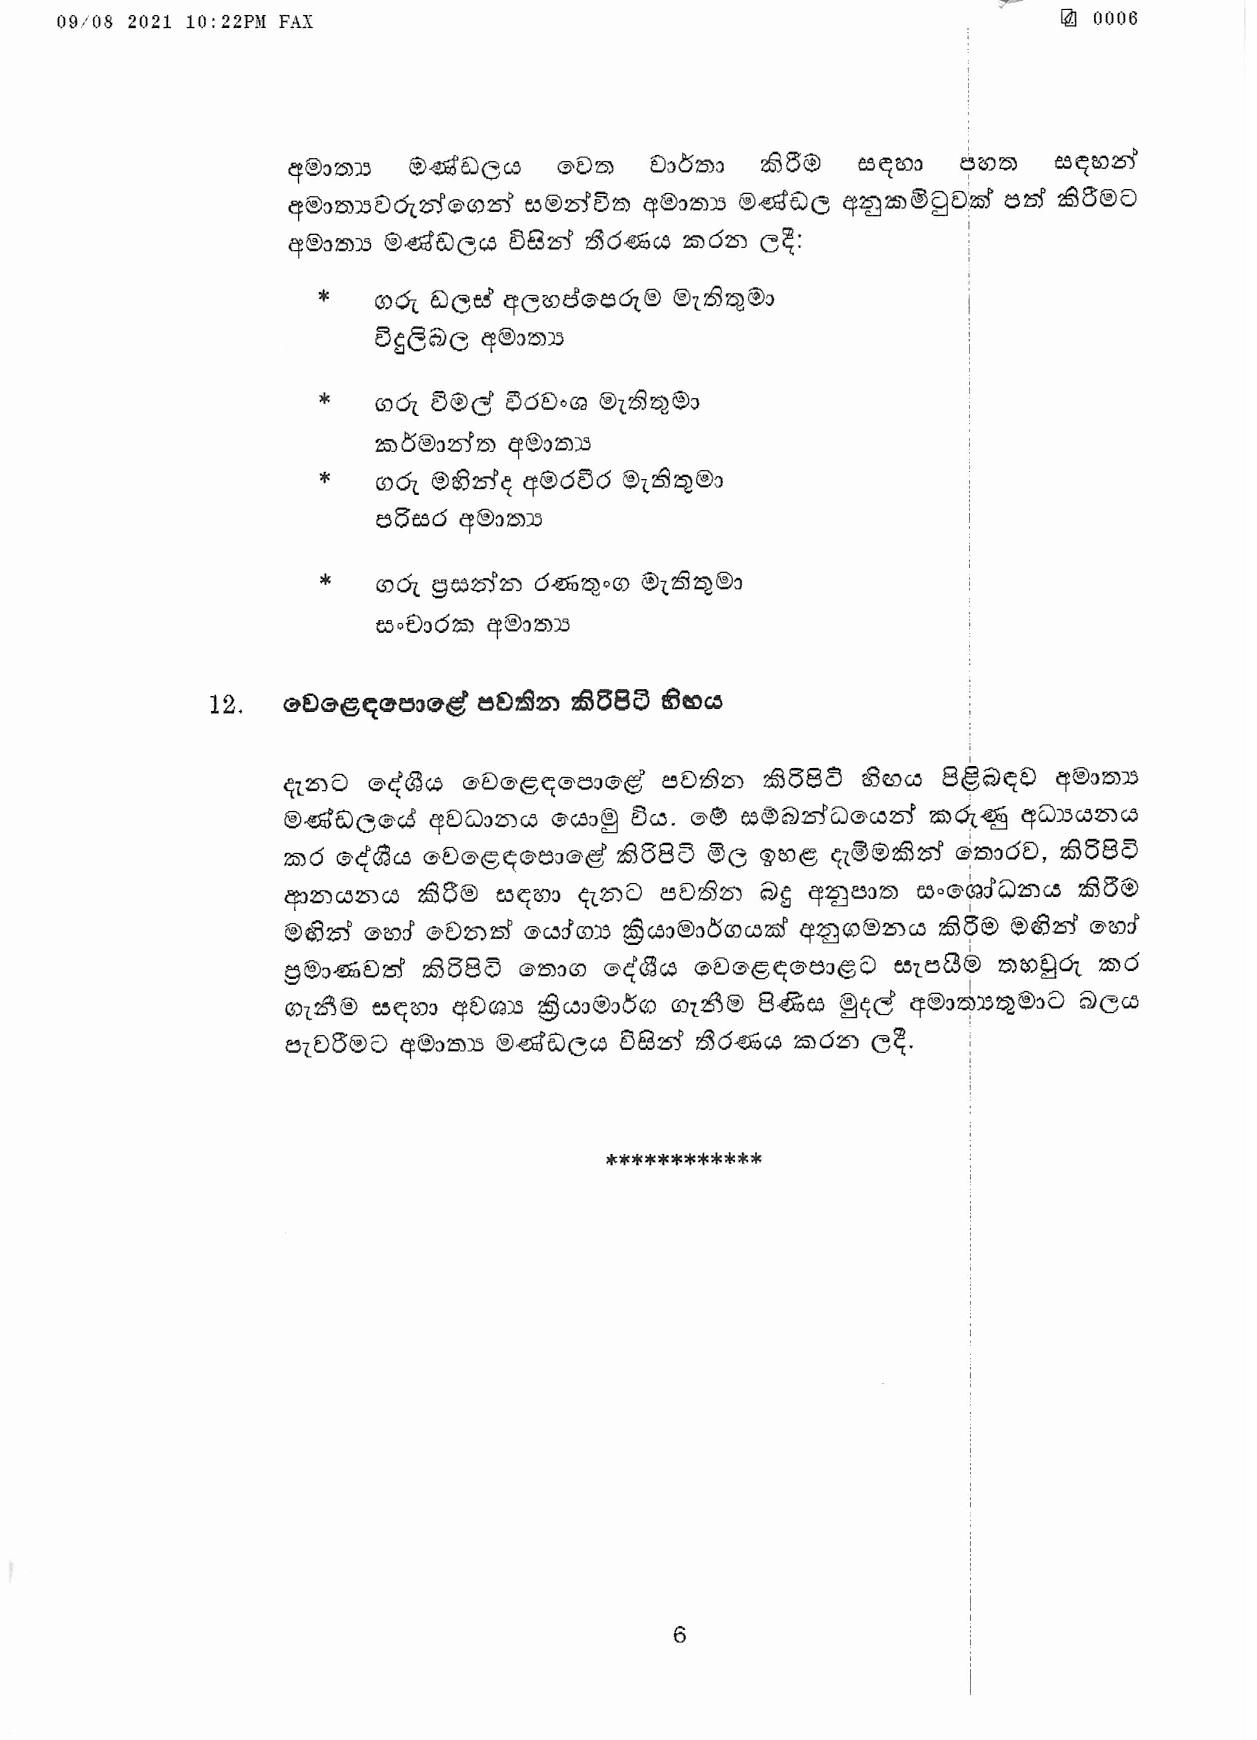 Cabinet Decision on 09.08.2021 Sinhala page 006